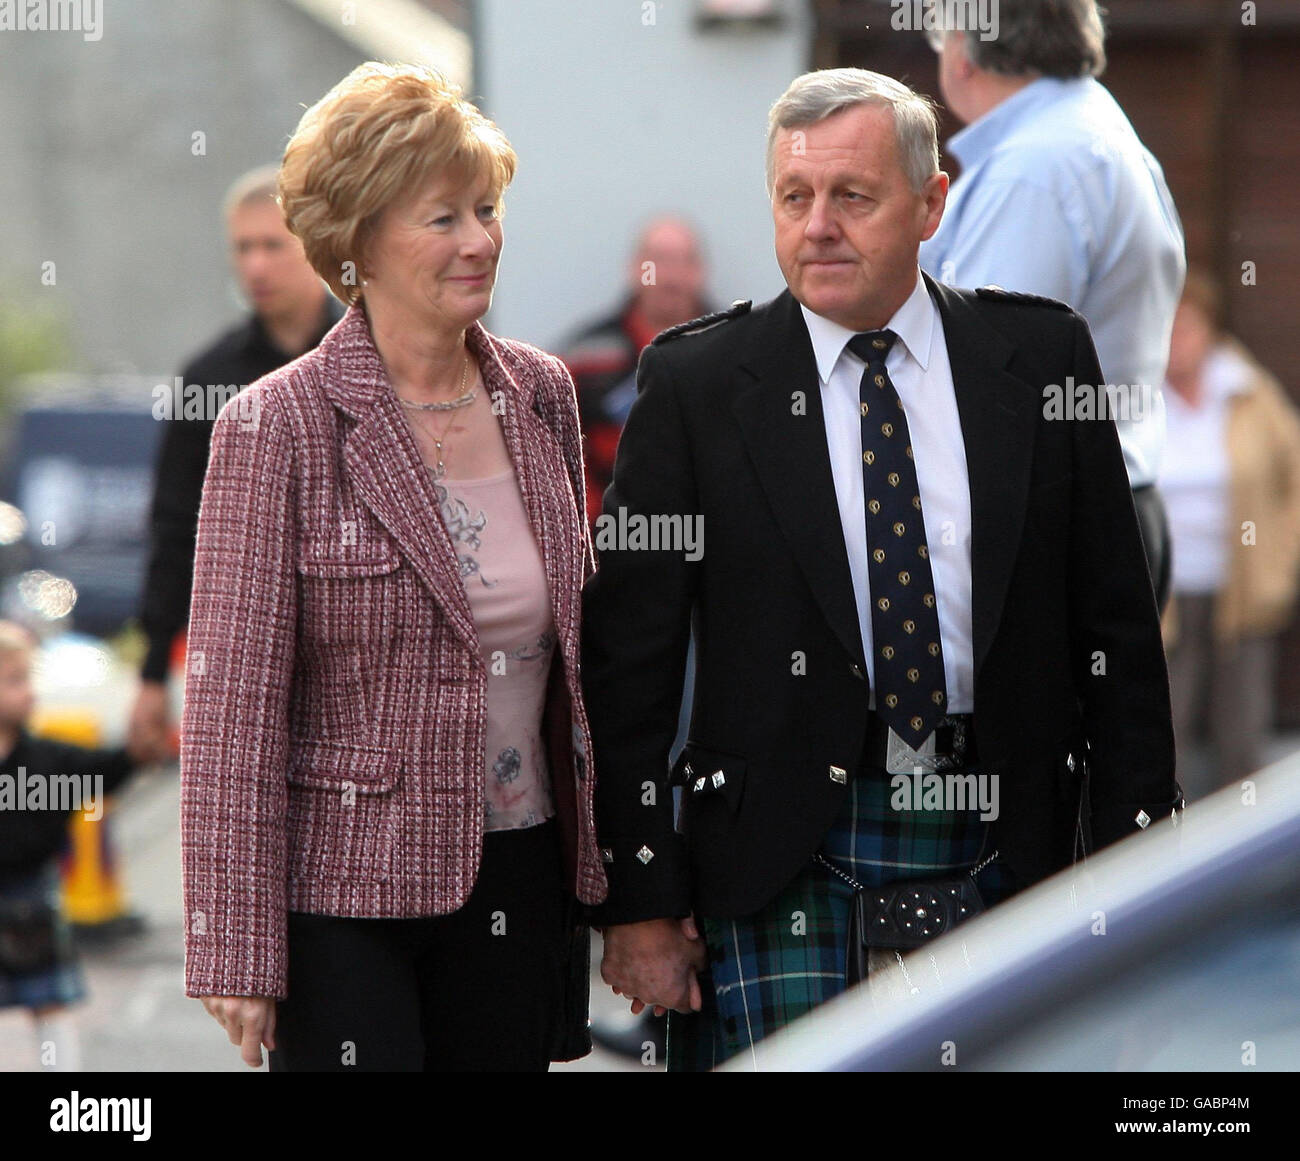 Jim McRae and his wife Margret arrive for the Service of Celebration for their son Colin McRae and their Grandson Johnny McRae taking place at St Nicholas Church, High Street in Lanark. Stock Photo